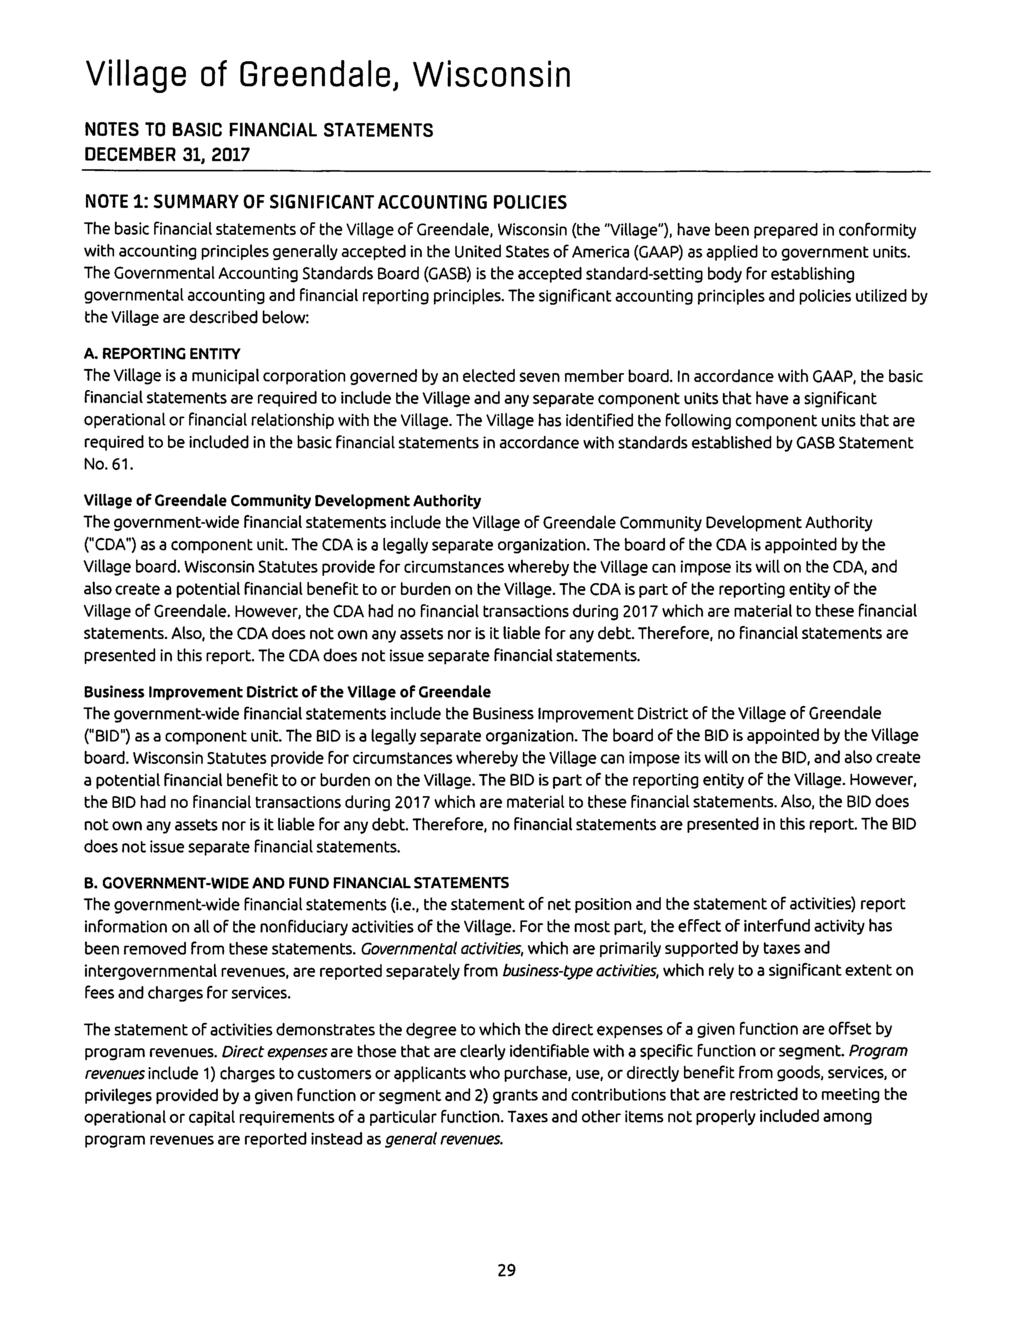 NOTES TO BASIC FINANCIAL STATEMENTS NOTE 1: SUMMARY OF SIGNIFICANT ACCOUNTING POLICIES The basic financial statements of the Village of Greendale, Wisconsin (the "Village"), have been prepared in